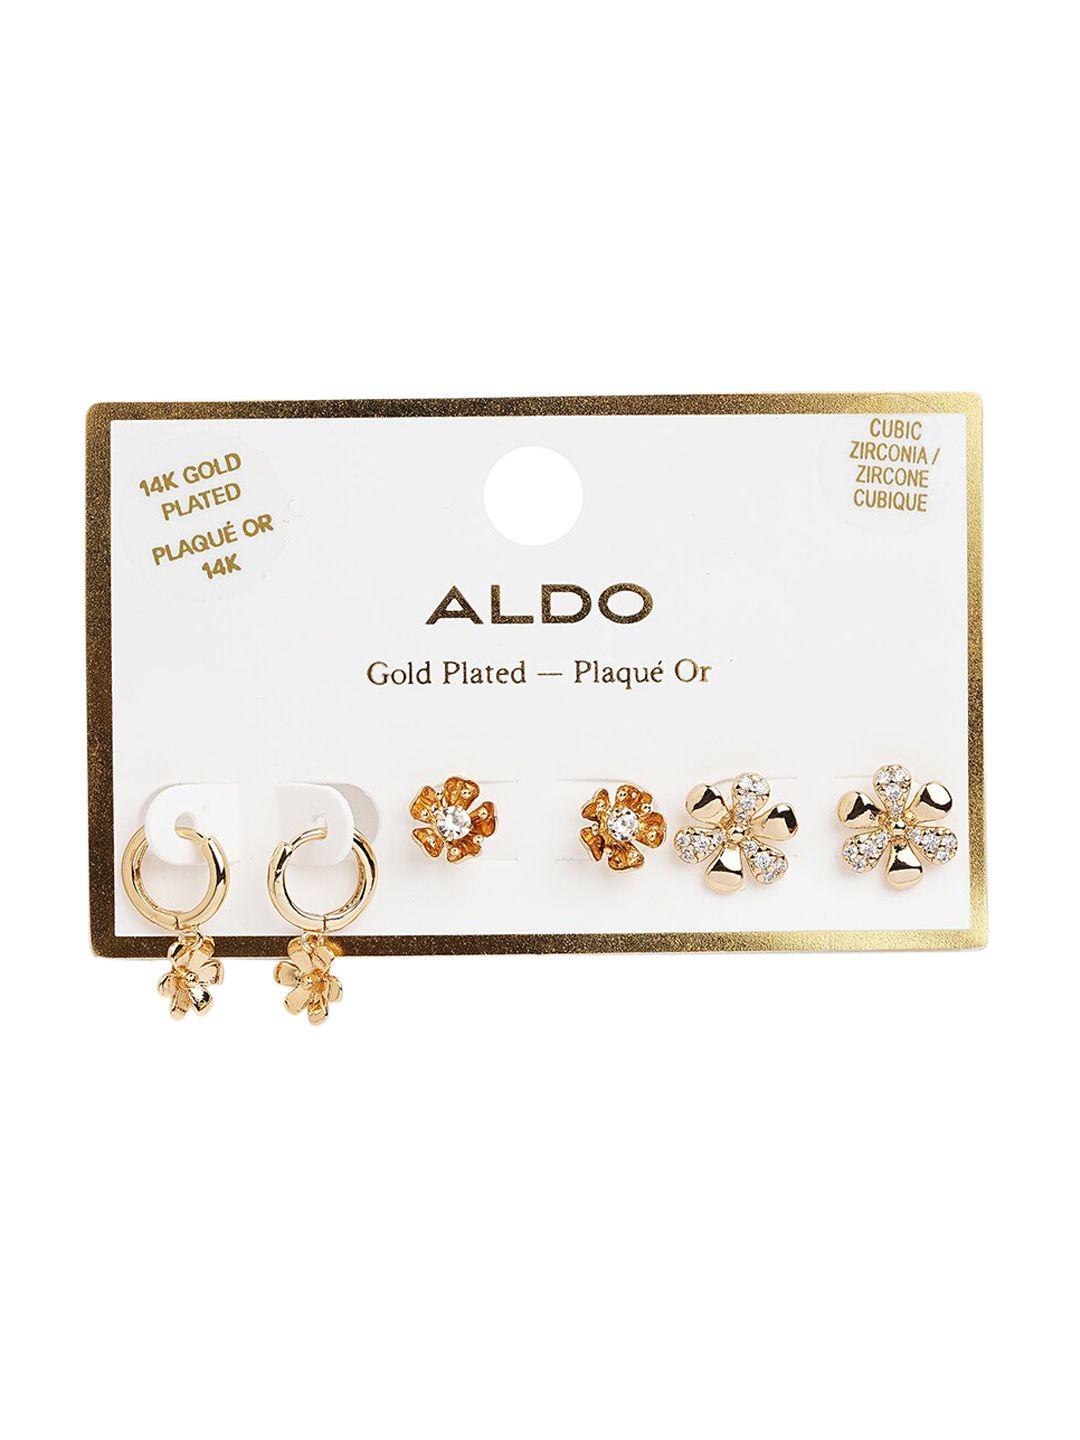 aldo set of 3 gold-plated contemporary studs earrings